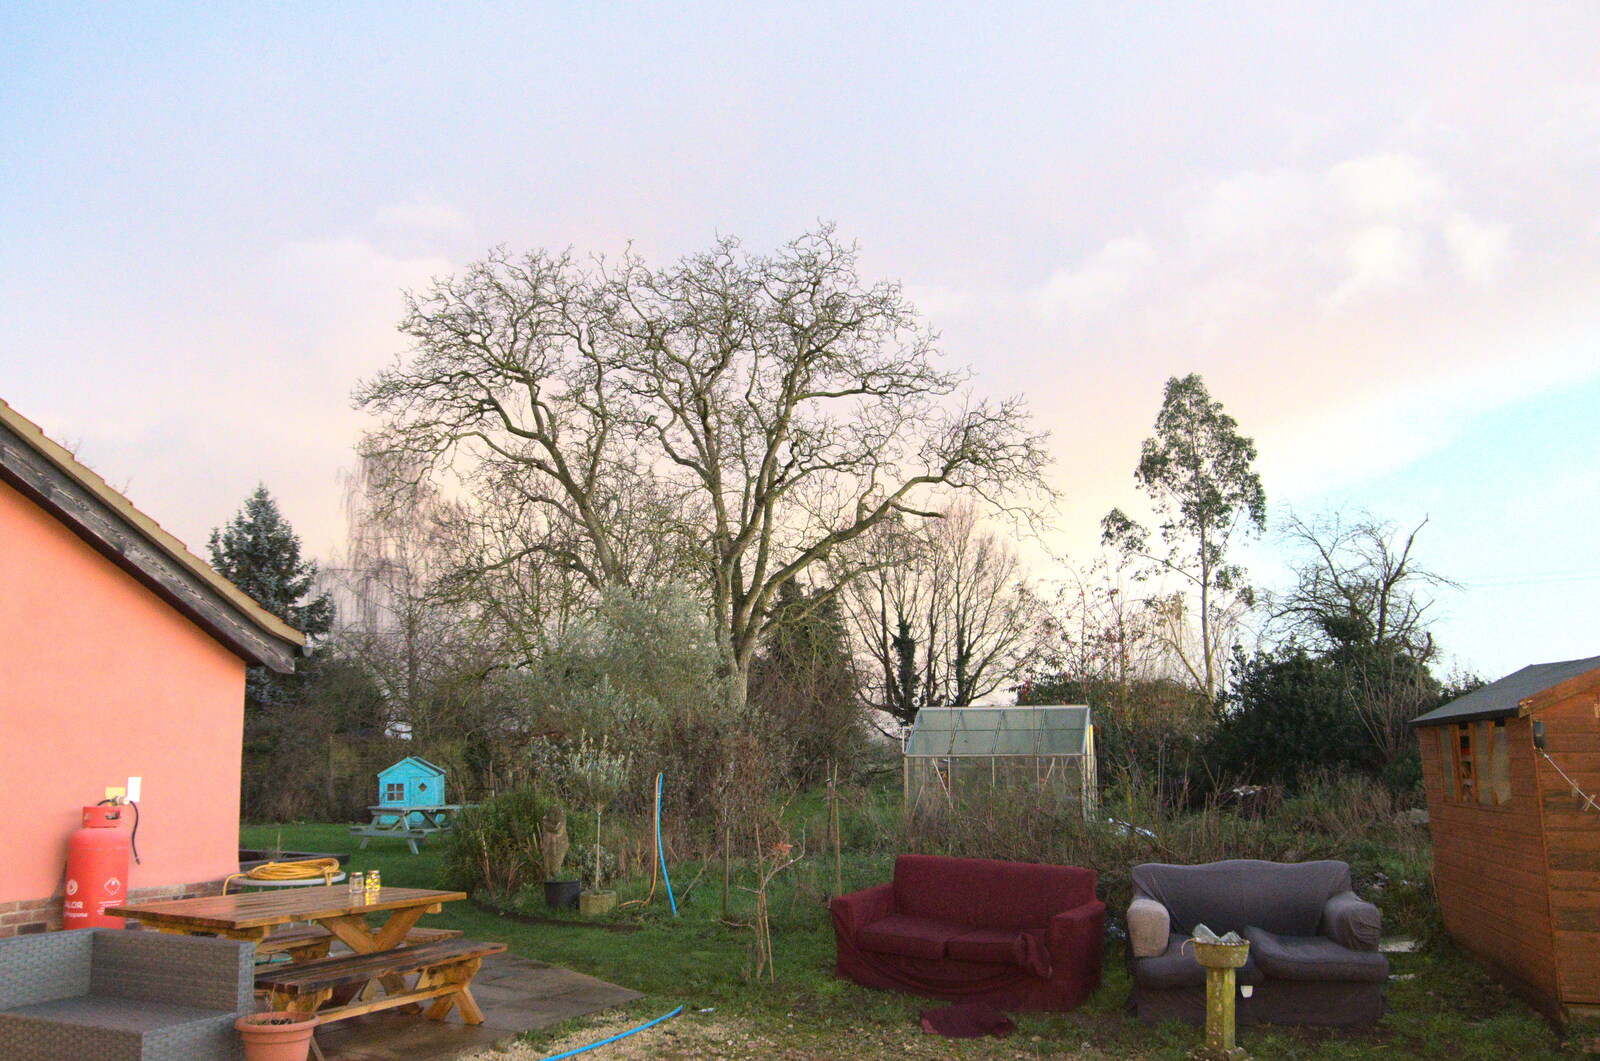 A couple of old sofas have been moved to the garden from Christmas Day, Brome, Suffolk - 25th December 2020